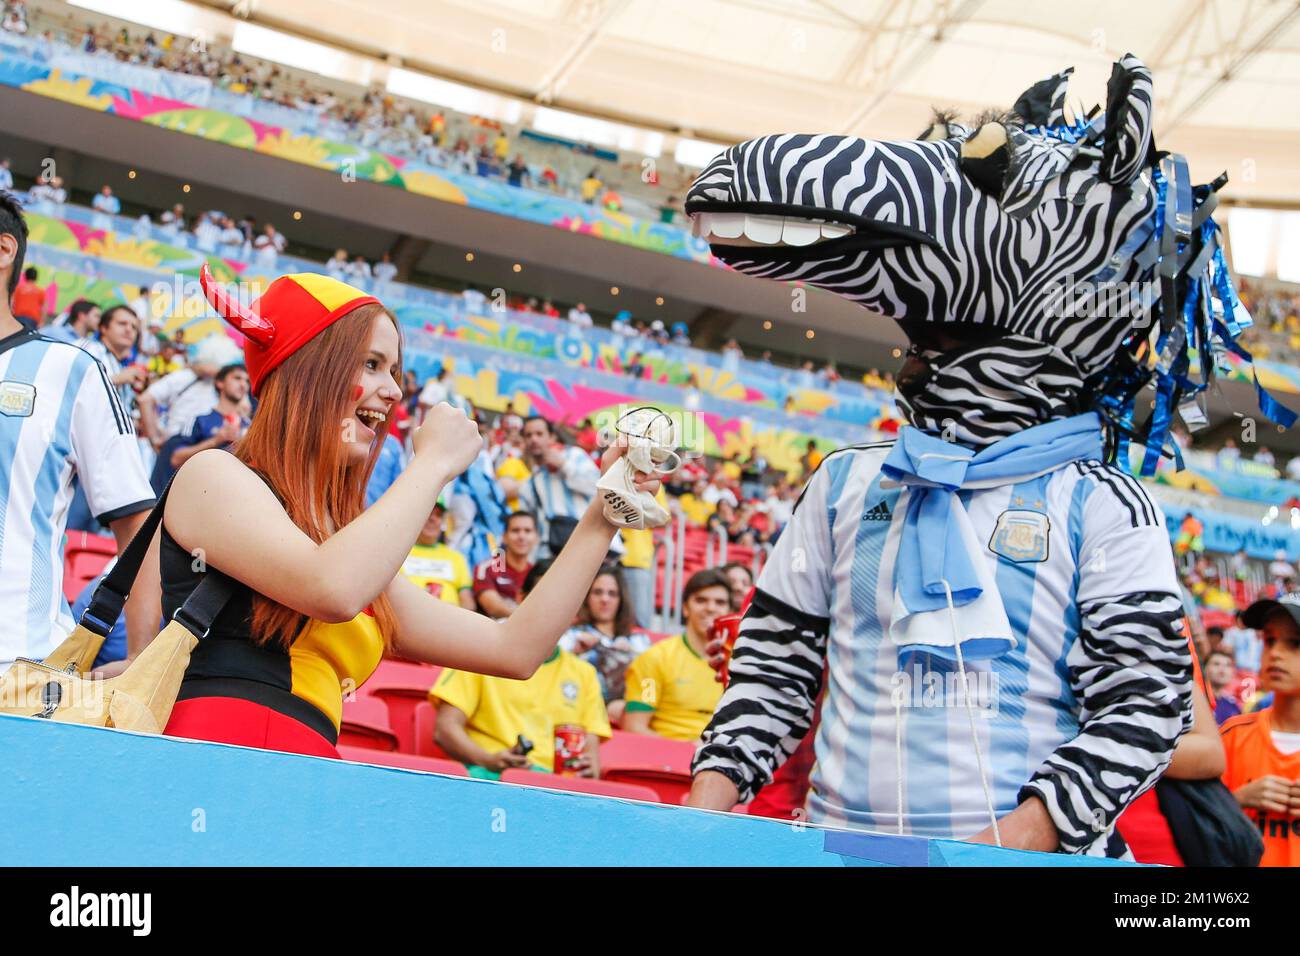 Red Devils' supporter and Argentinian Zebra mascot pictured prior to the quarter final match between Belgian national soccer team Red Devils and Argentina, in Estadio Nacional Mane Garrincha, in Brasilia, Brazil, during the 2014 FIFA World Cup, Saturday 05 July 2014. BELGA PHOTO BRUNO FAHY Stock Photo